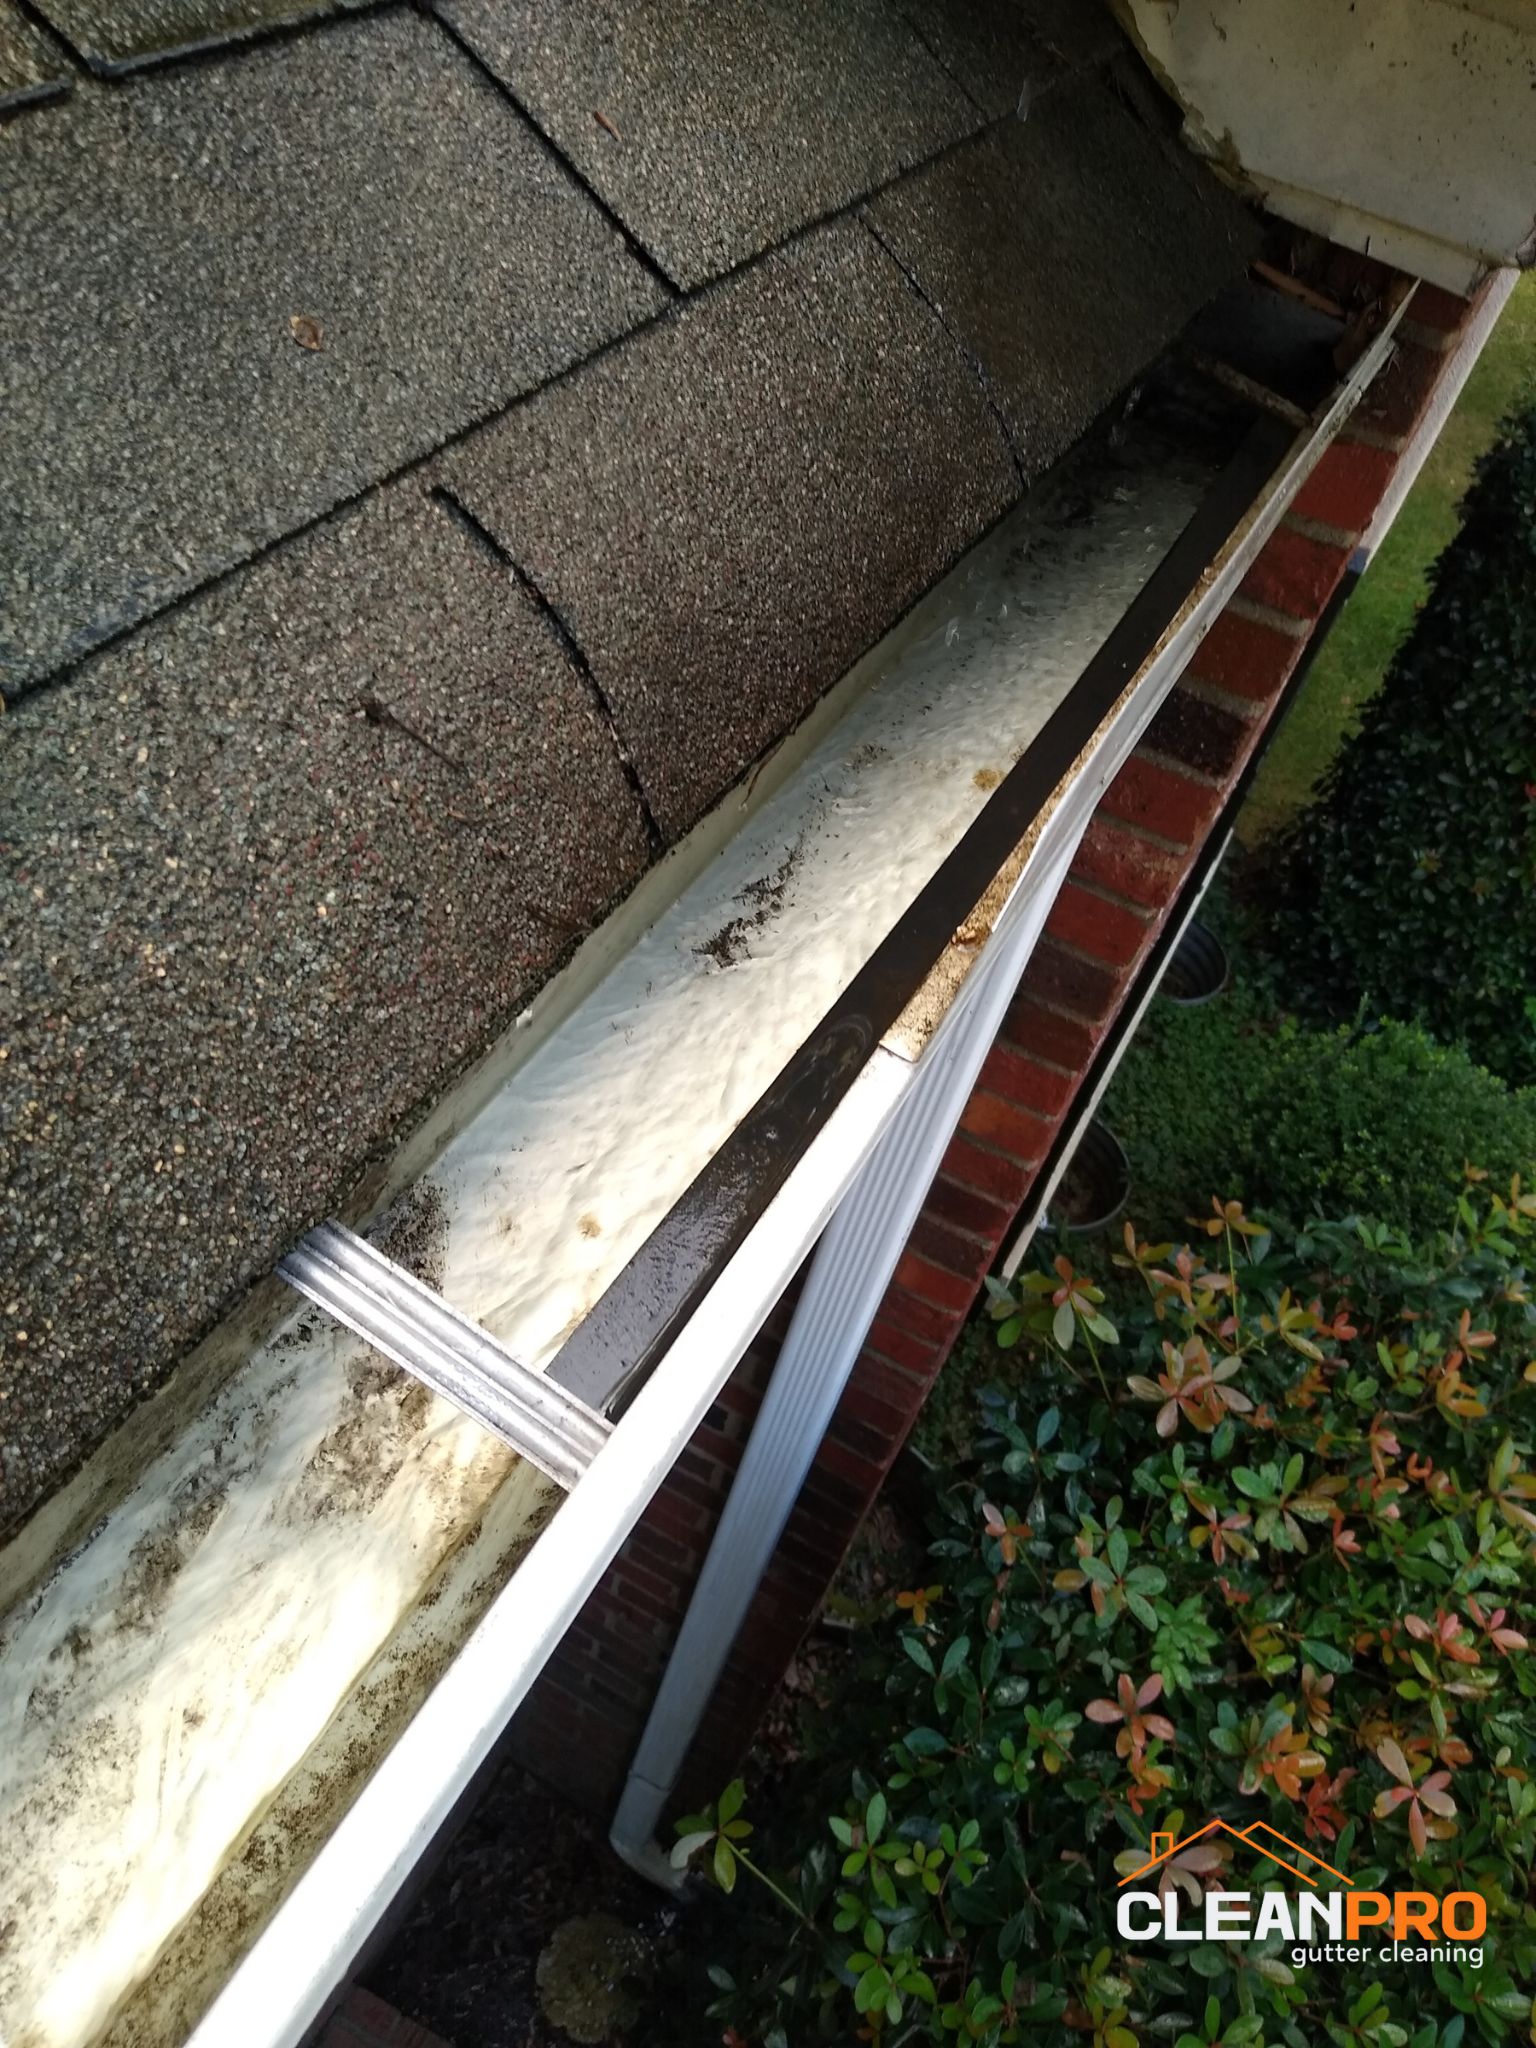 Top Notch Gutter Cleaning Service in Tulsa